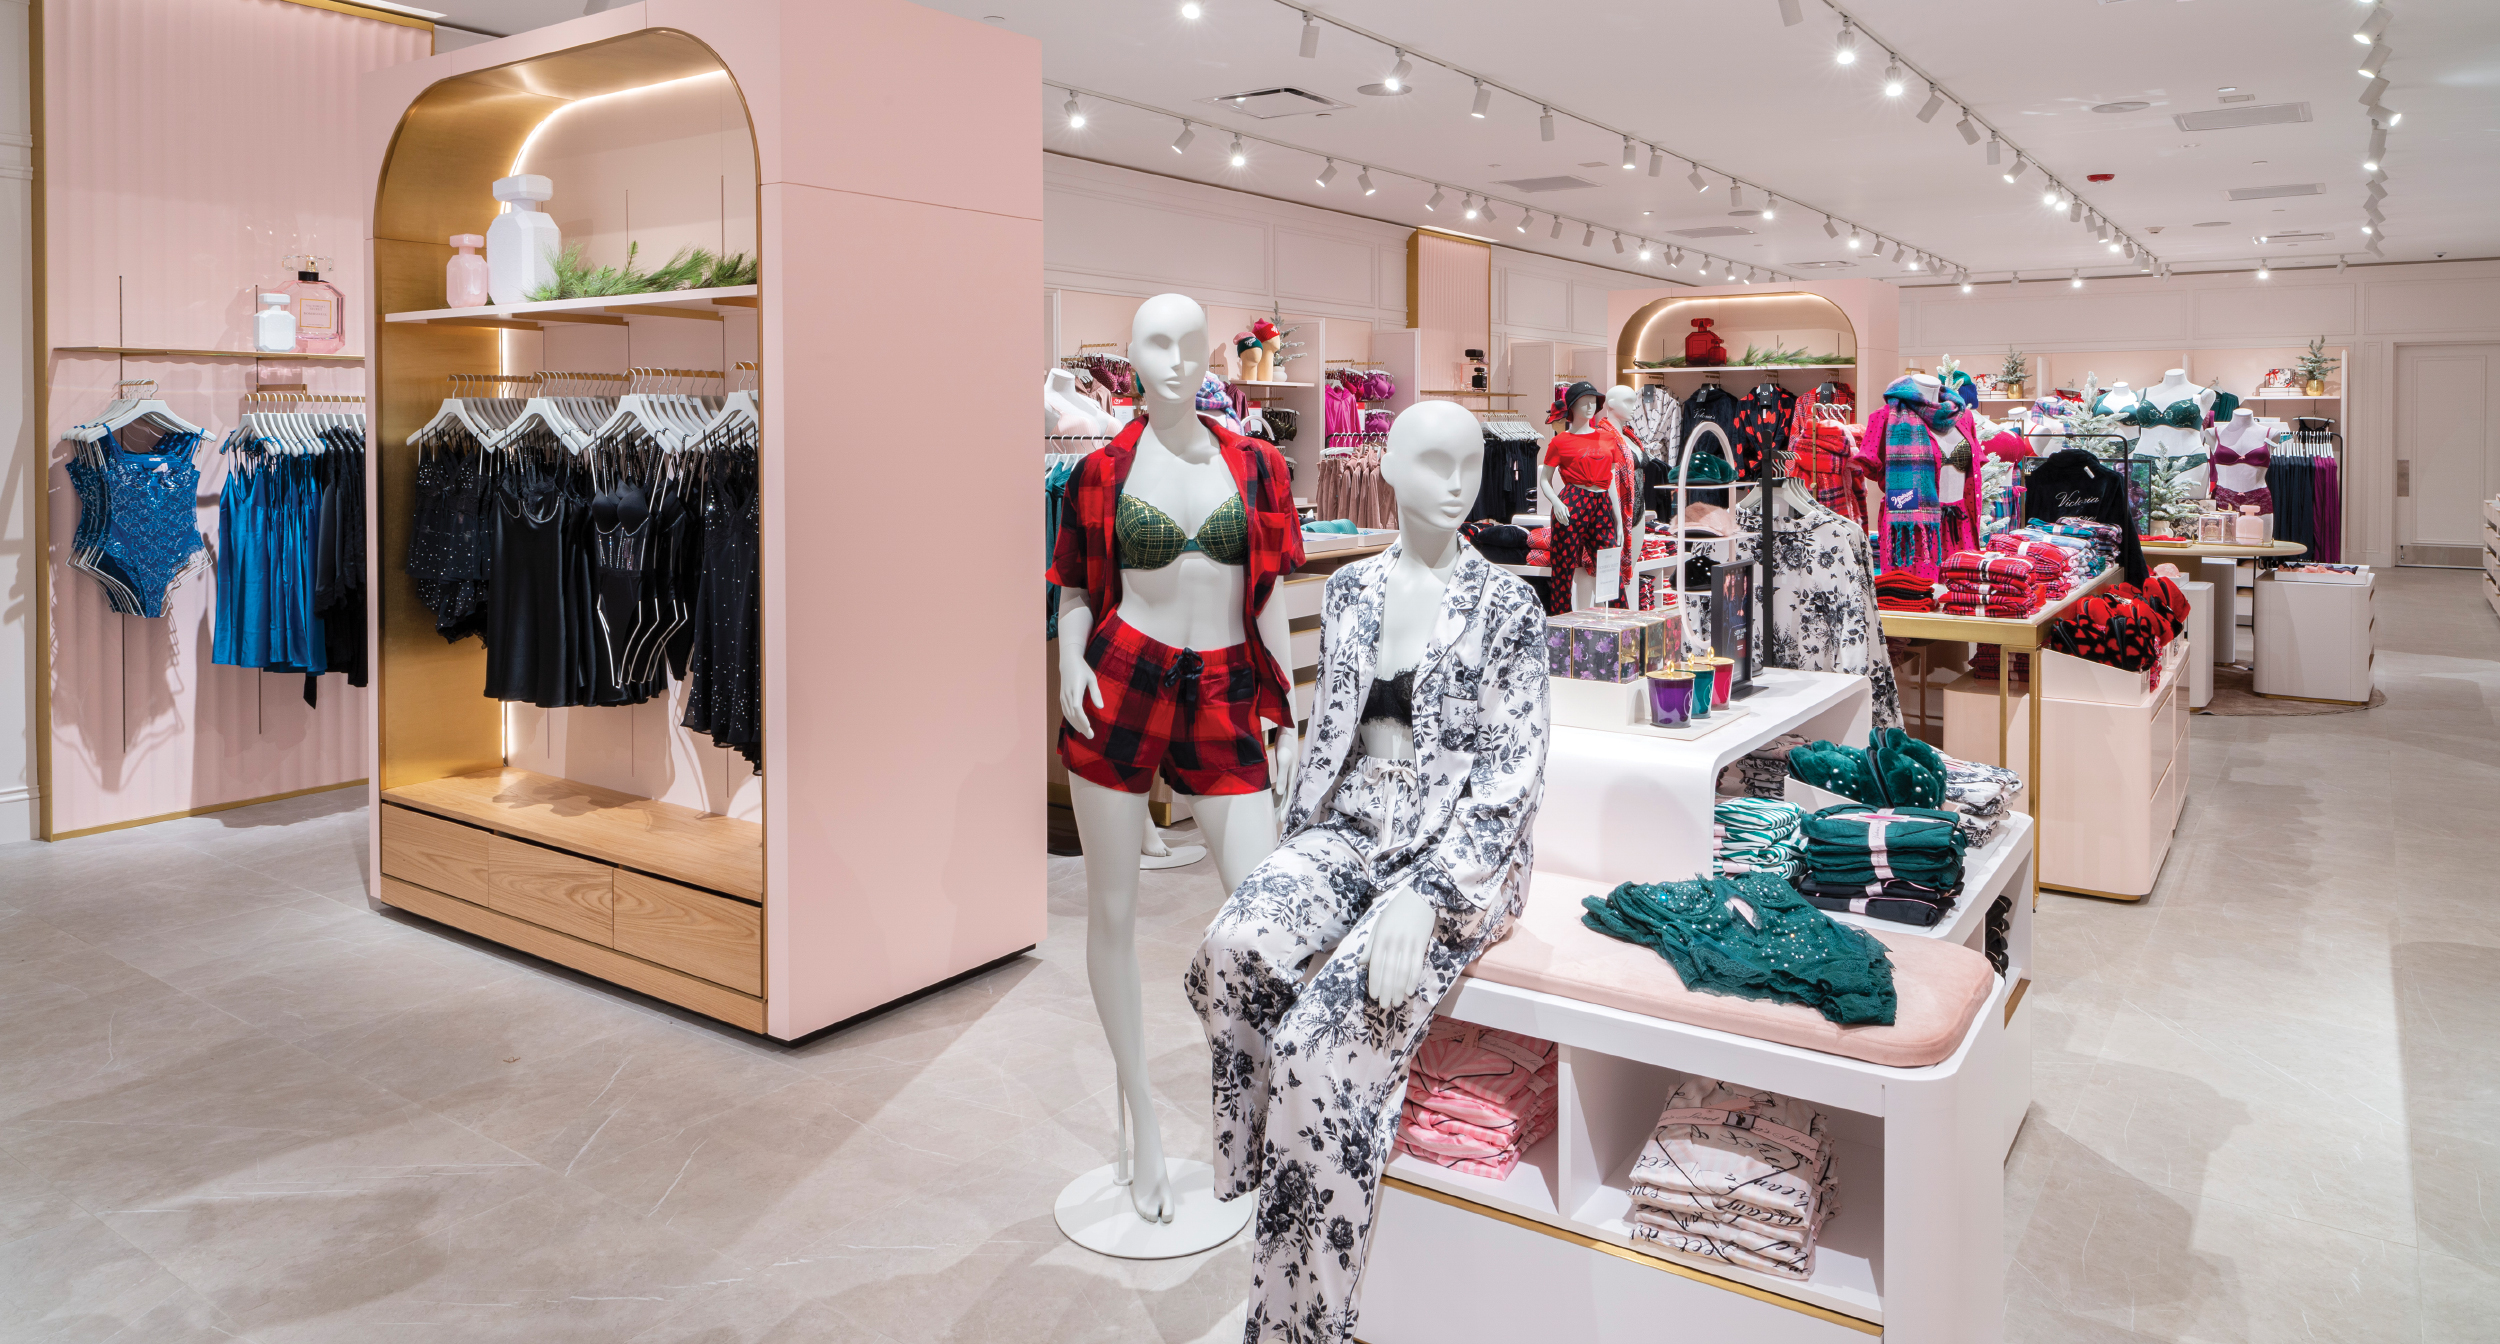 Mannequins in a range of body types were created using proprietary 3-D modeling and sculpting technology from the company that designed them. The new inclusive sizes showcase the variety of apparel available to shoppers. 